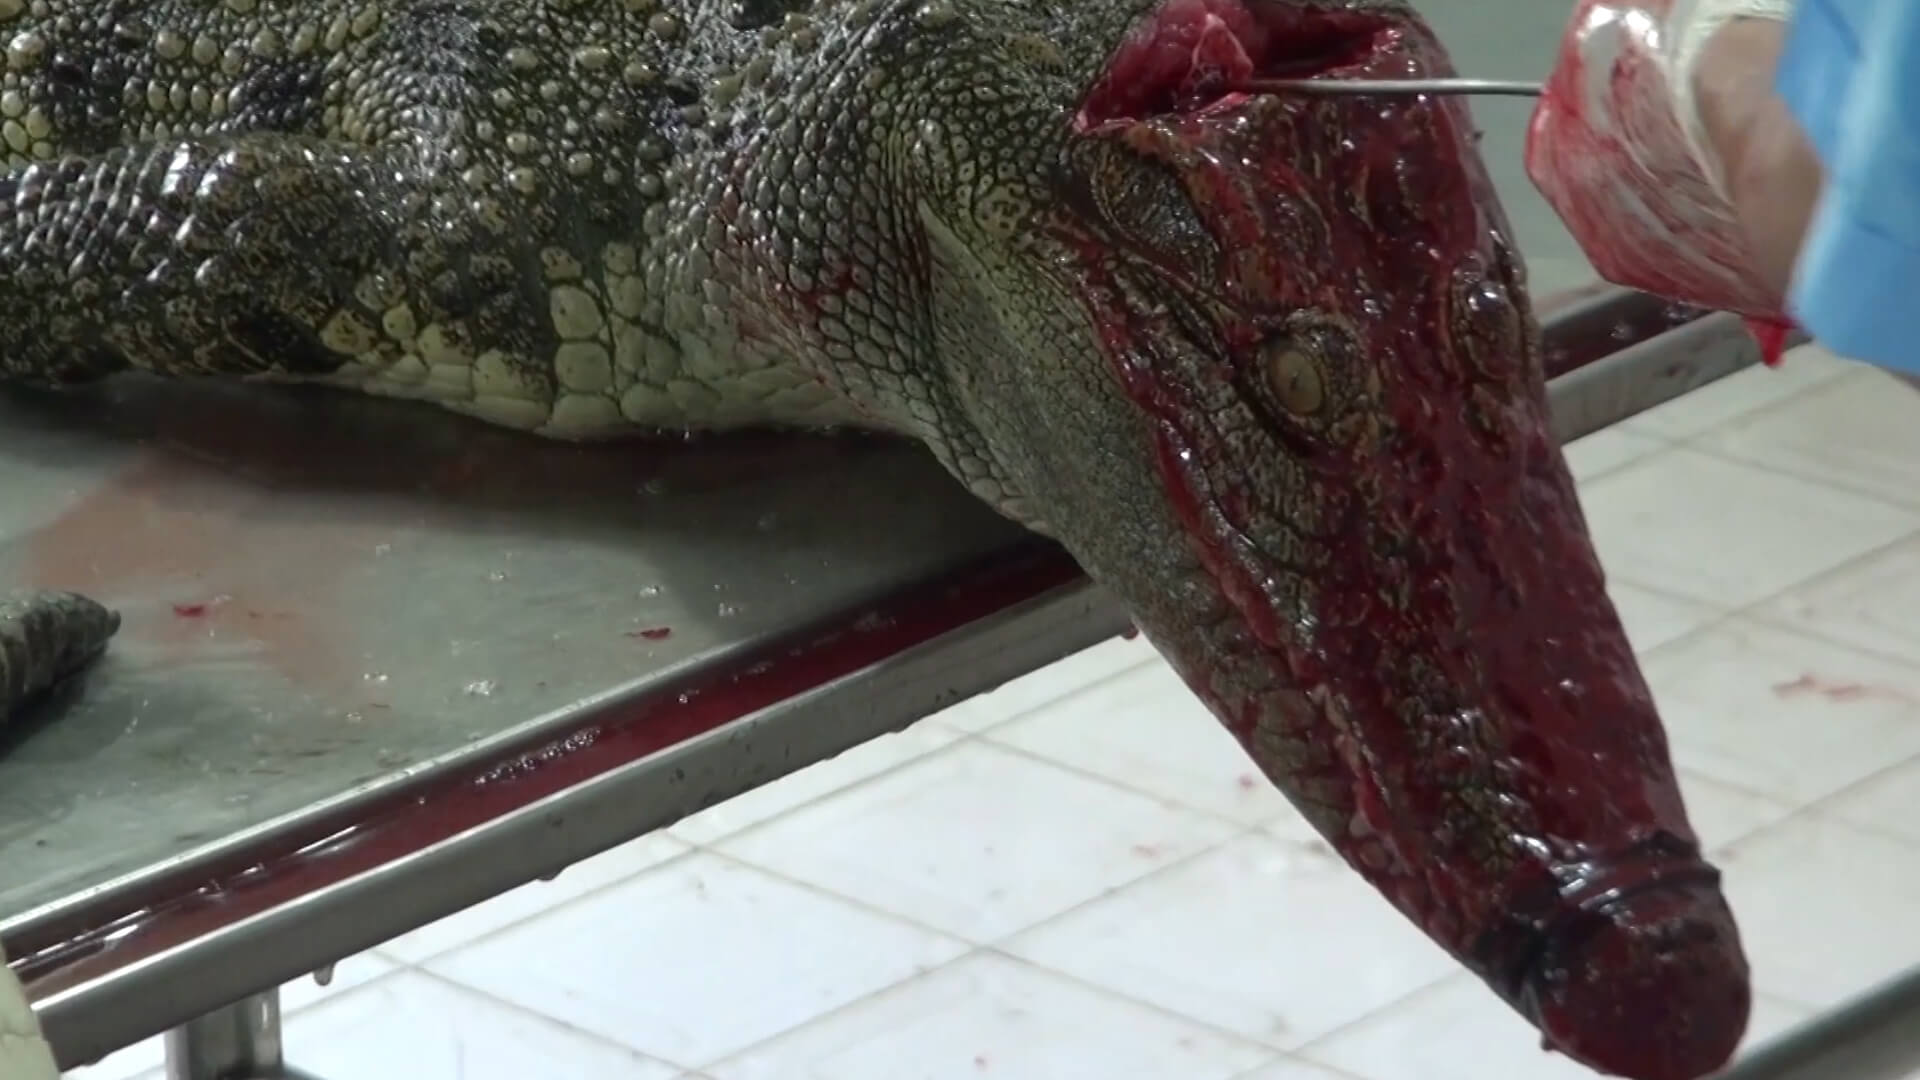 Crocodiles Die Horrifically In Vietnam For Louis Vuitton Leather Bags